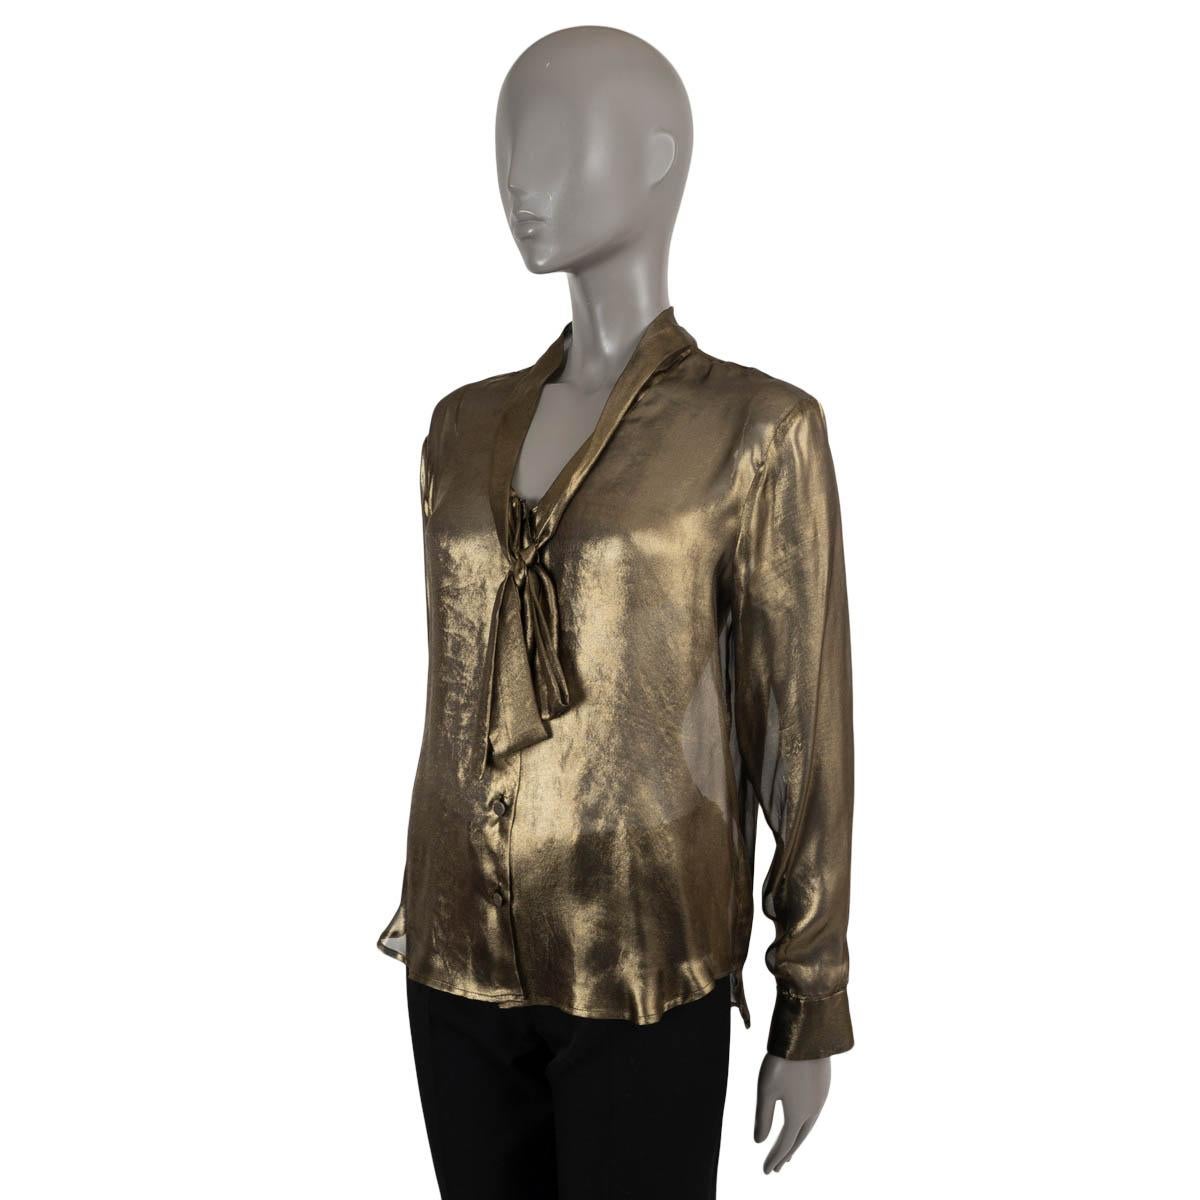 100% authentic Bottega Veneta pussy-bow blouse in gold lurex. Closes with buttons on the front. New with tag.

2012 Pre-Fall

Measurements
Tag Size	40
Size	S
Shoulder Width	433cm (168.9in)
Bust From	102cm (39.8in)
Waist From	100cm (39in)
Hips